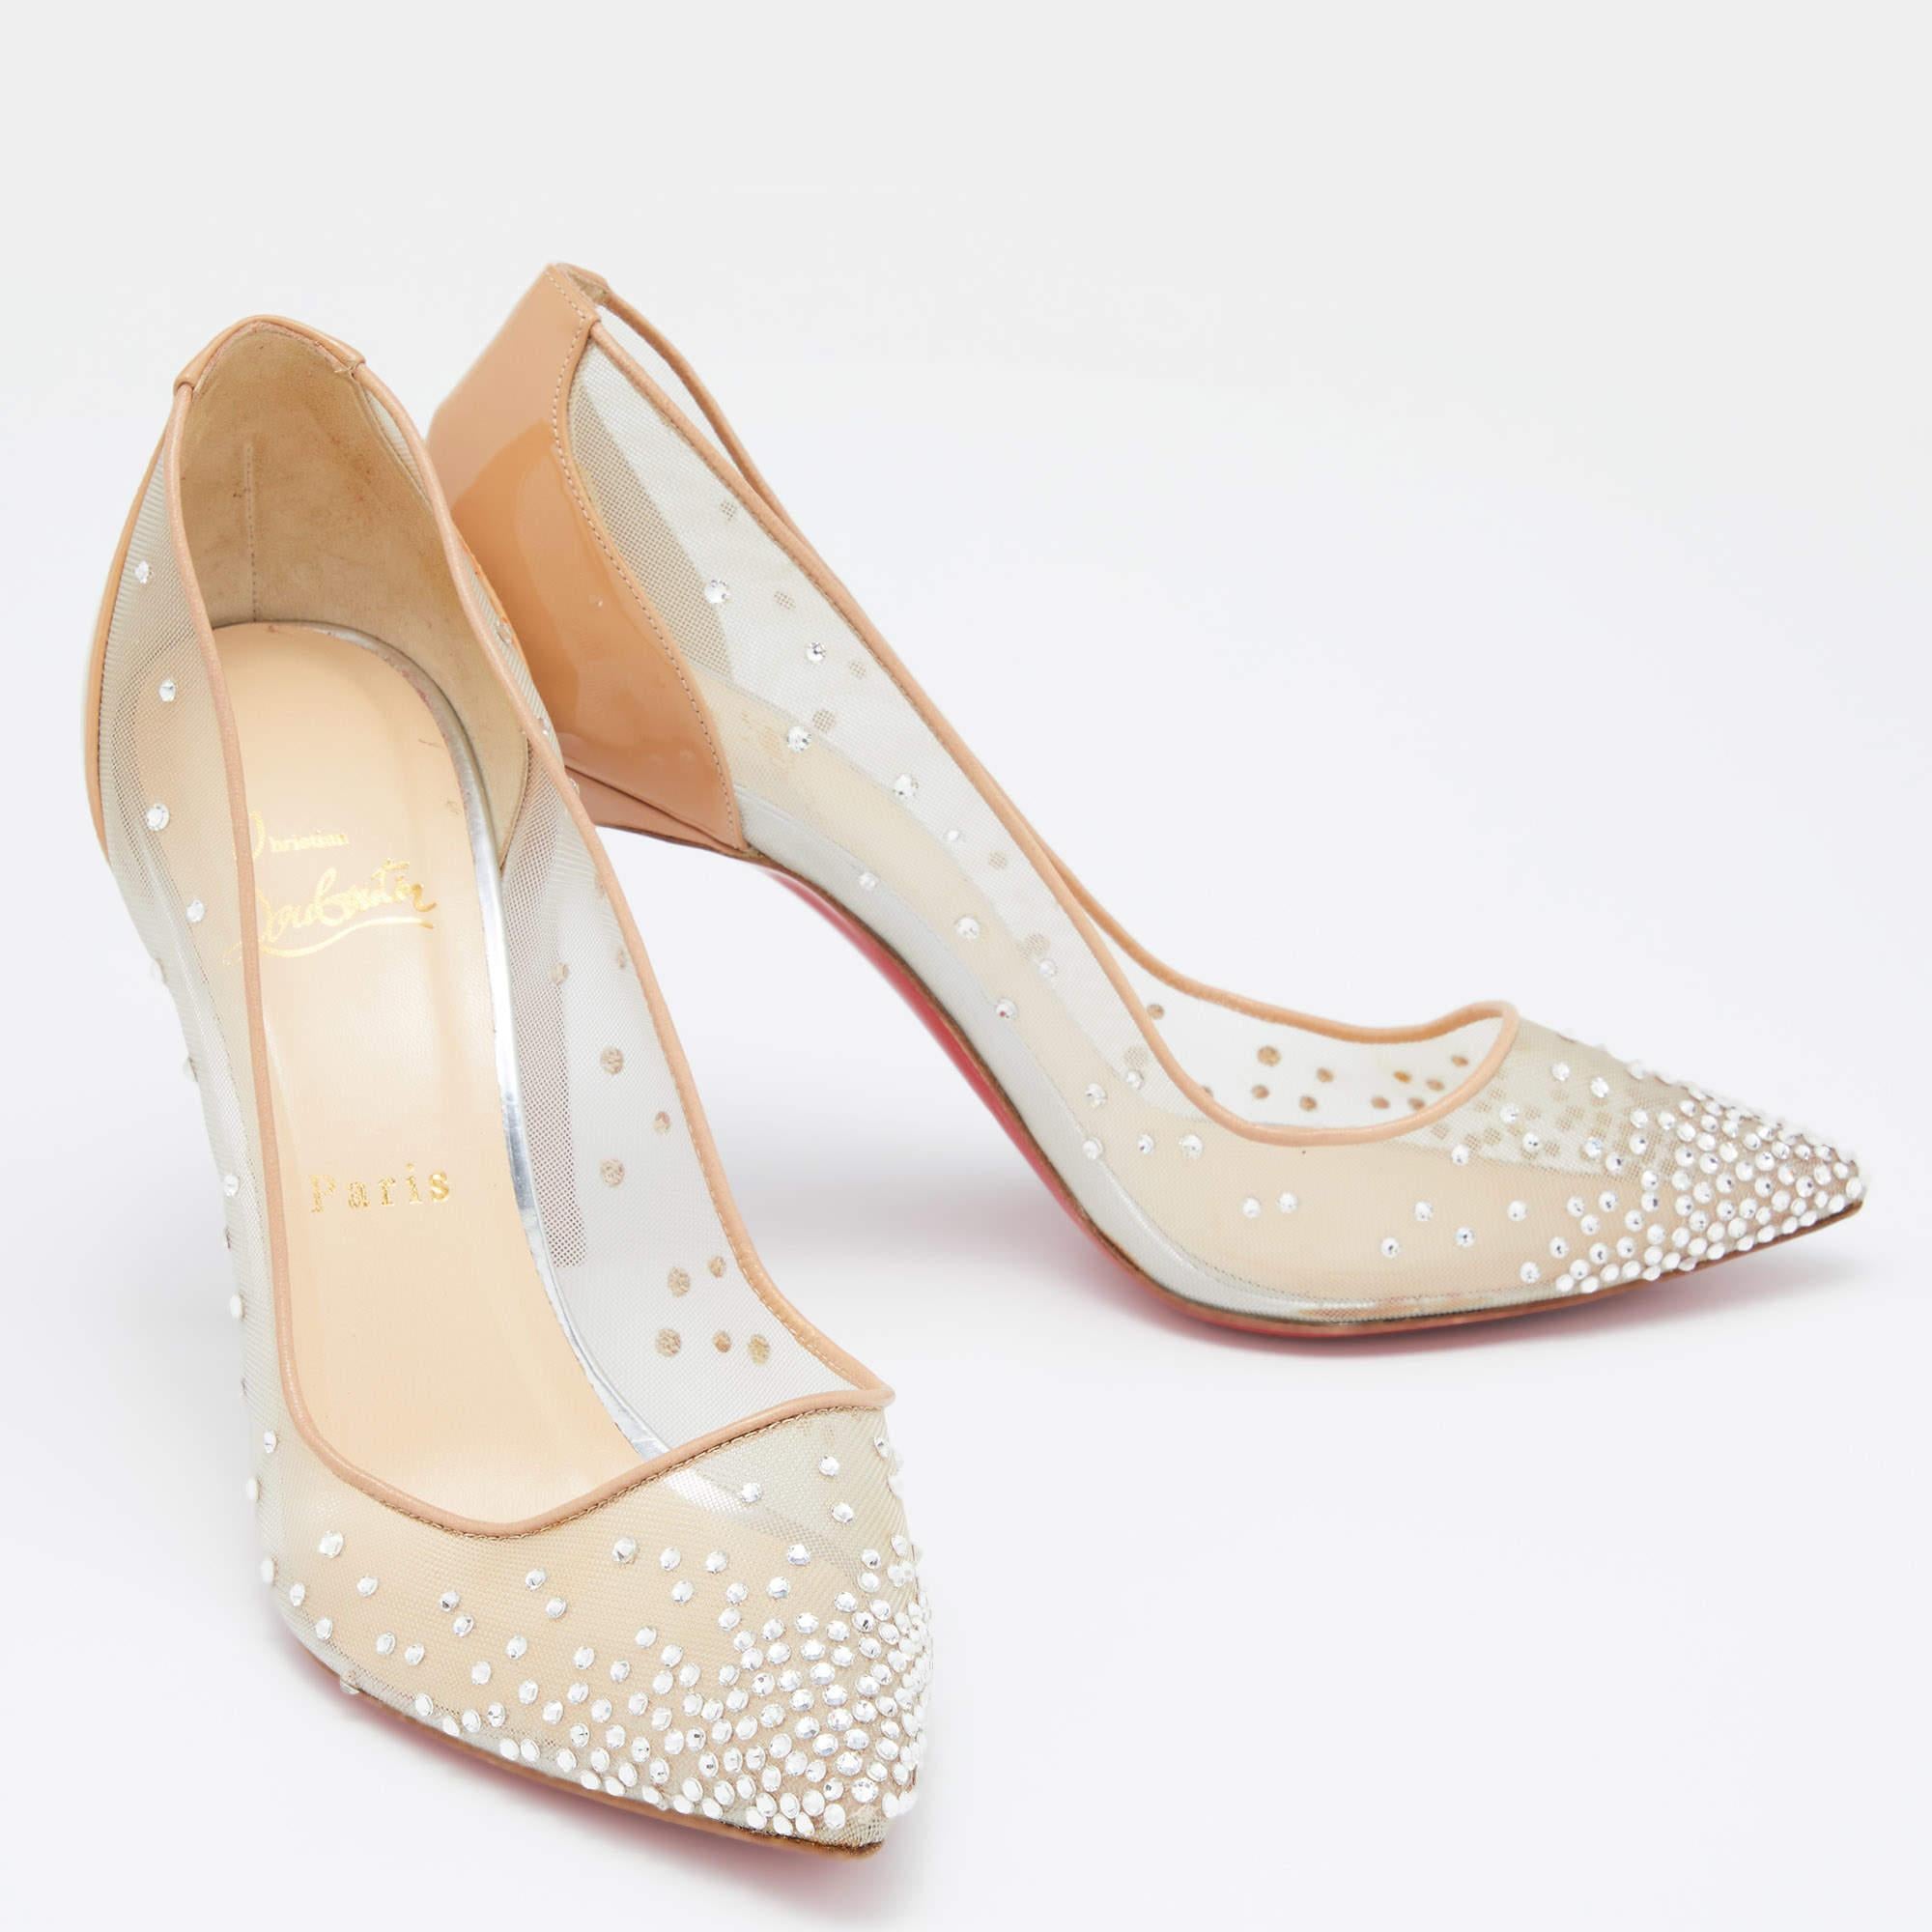 Christian Louboutin Beige Mesh and Patent Leather Follies Strass Pumps Size 39 1